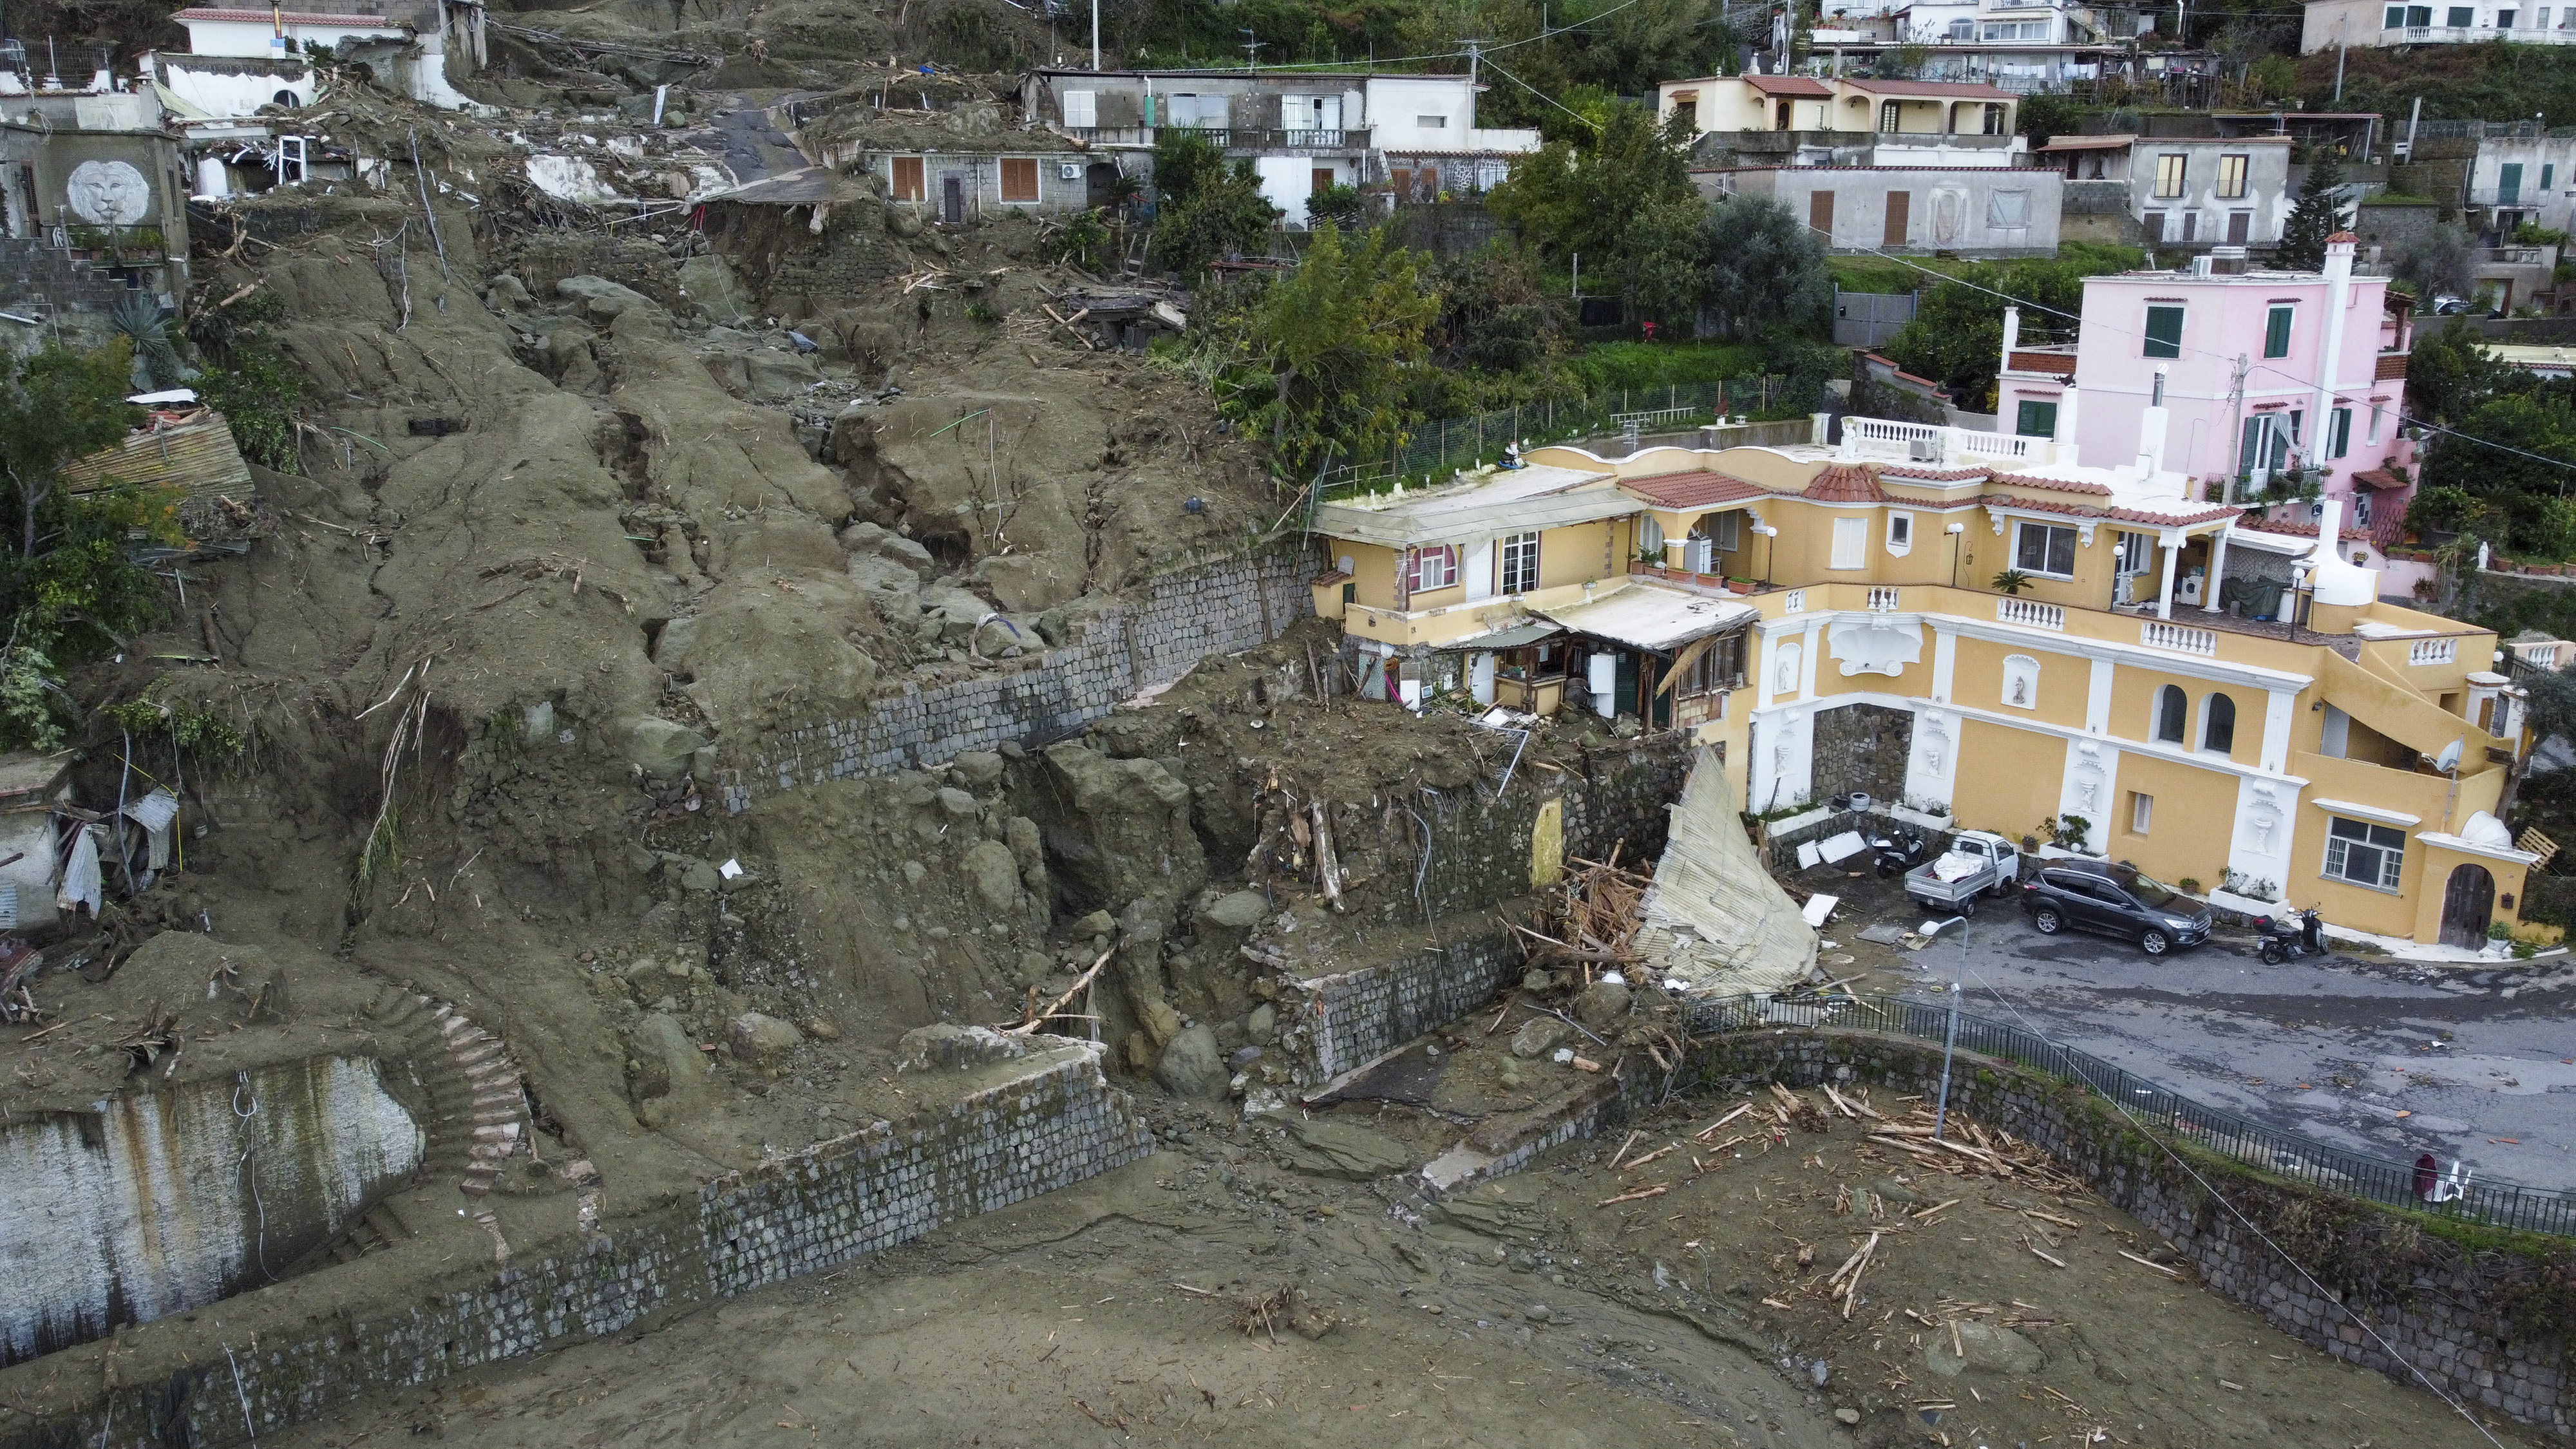 Italian Rescuers Search for About a Dozen Missing After Landslides